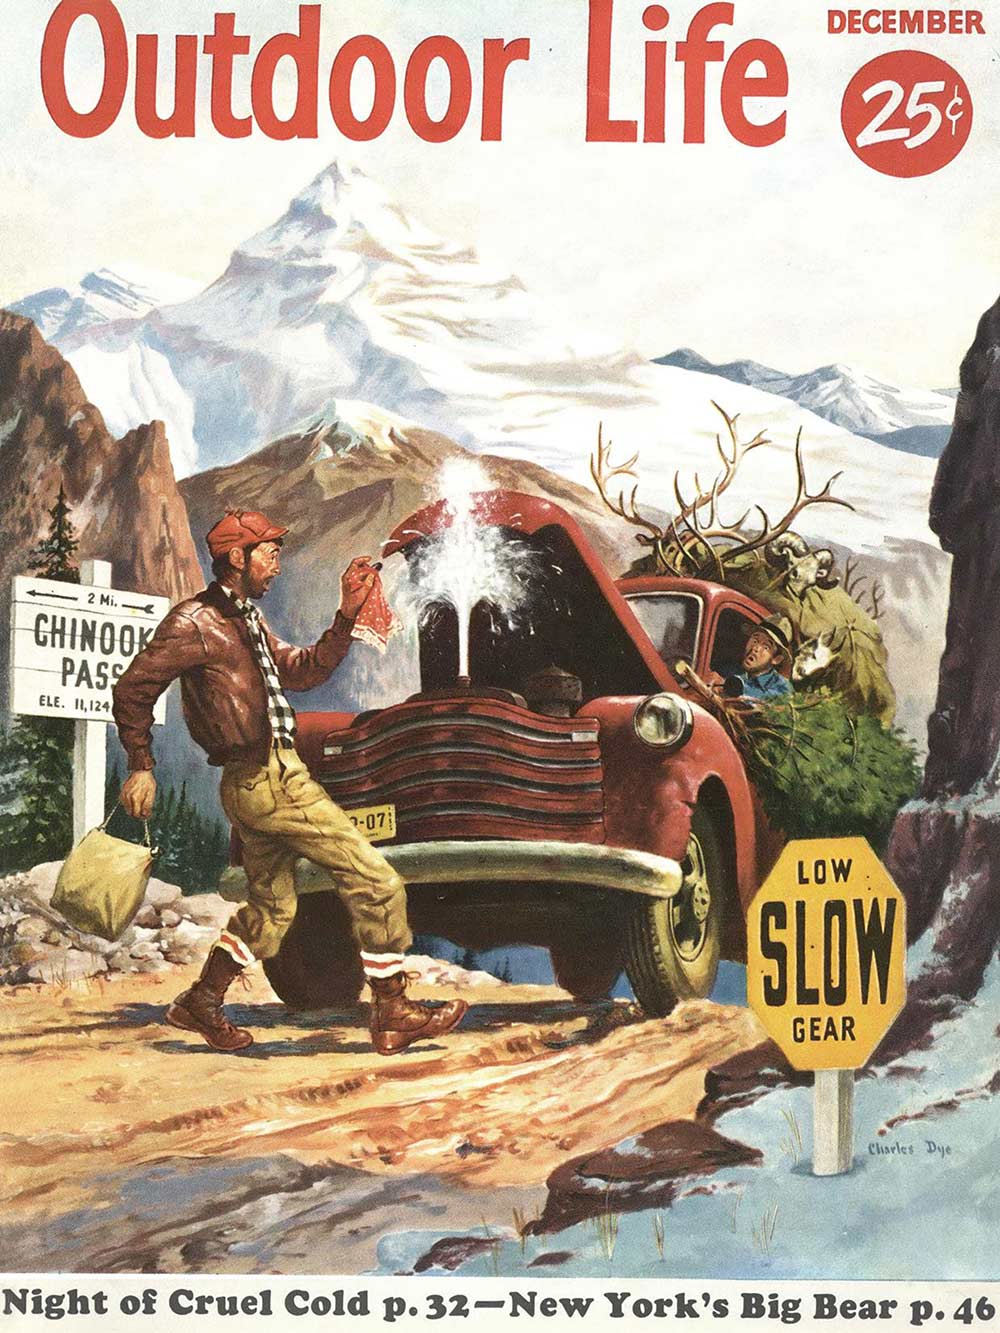 December 1955 Cover of Outdoor Life